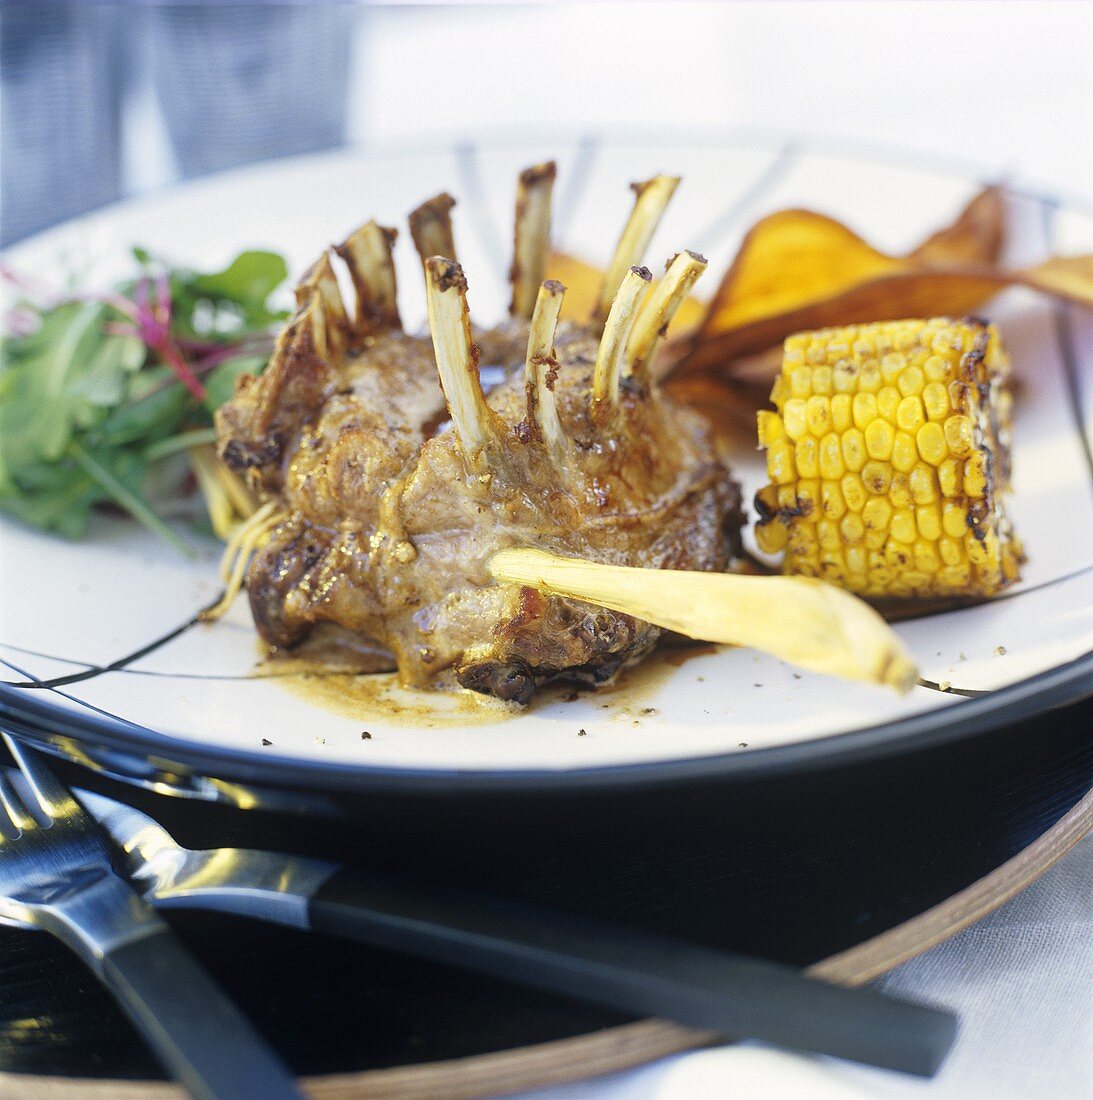 Wild boar chops with corn cobs and sweet potatoes